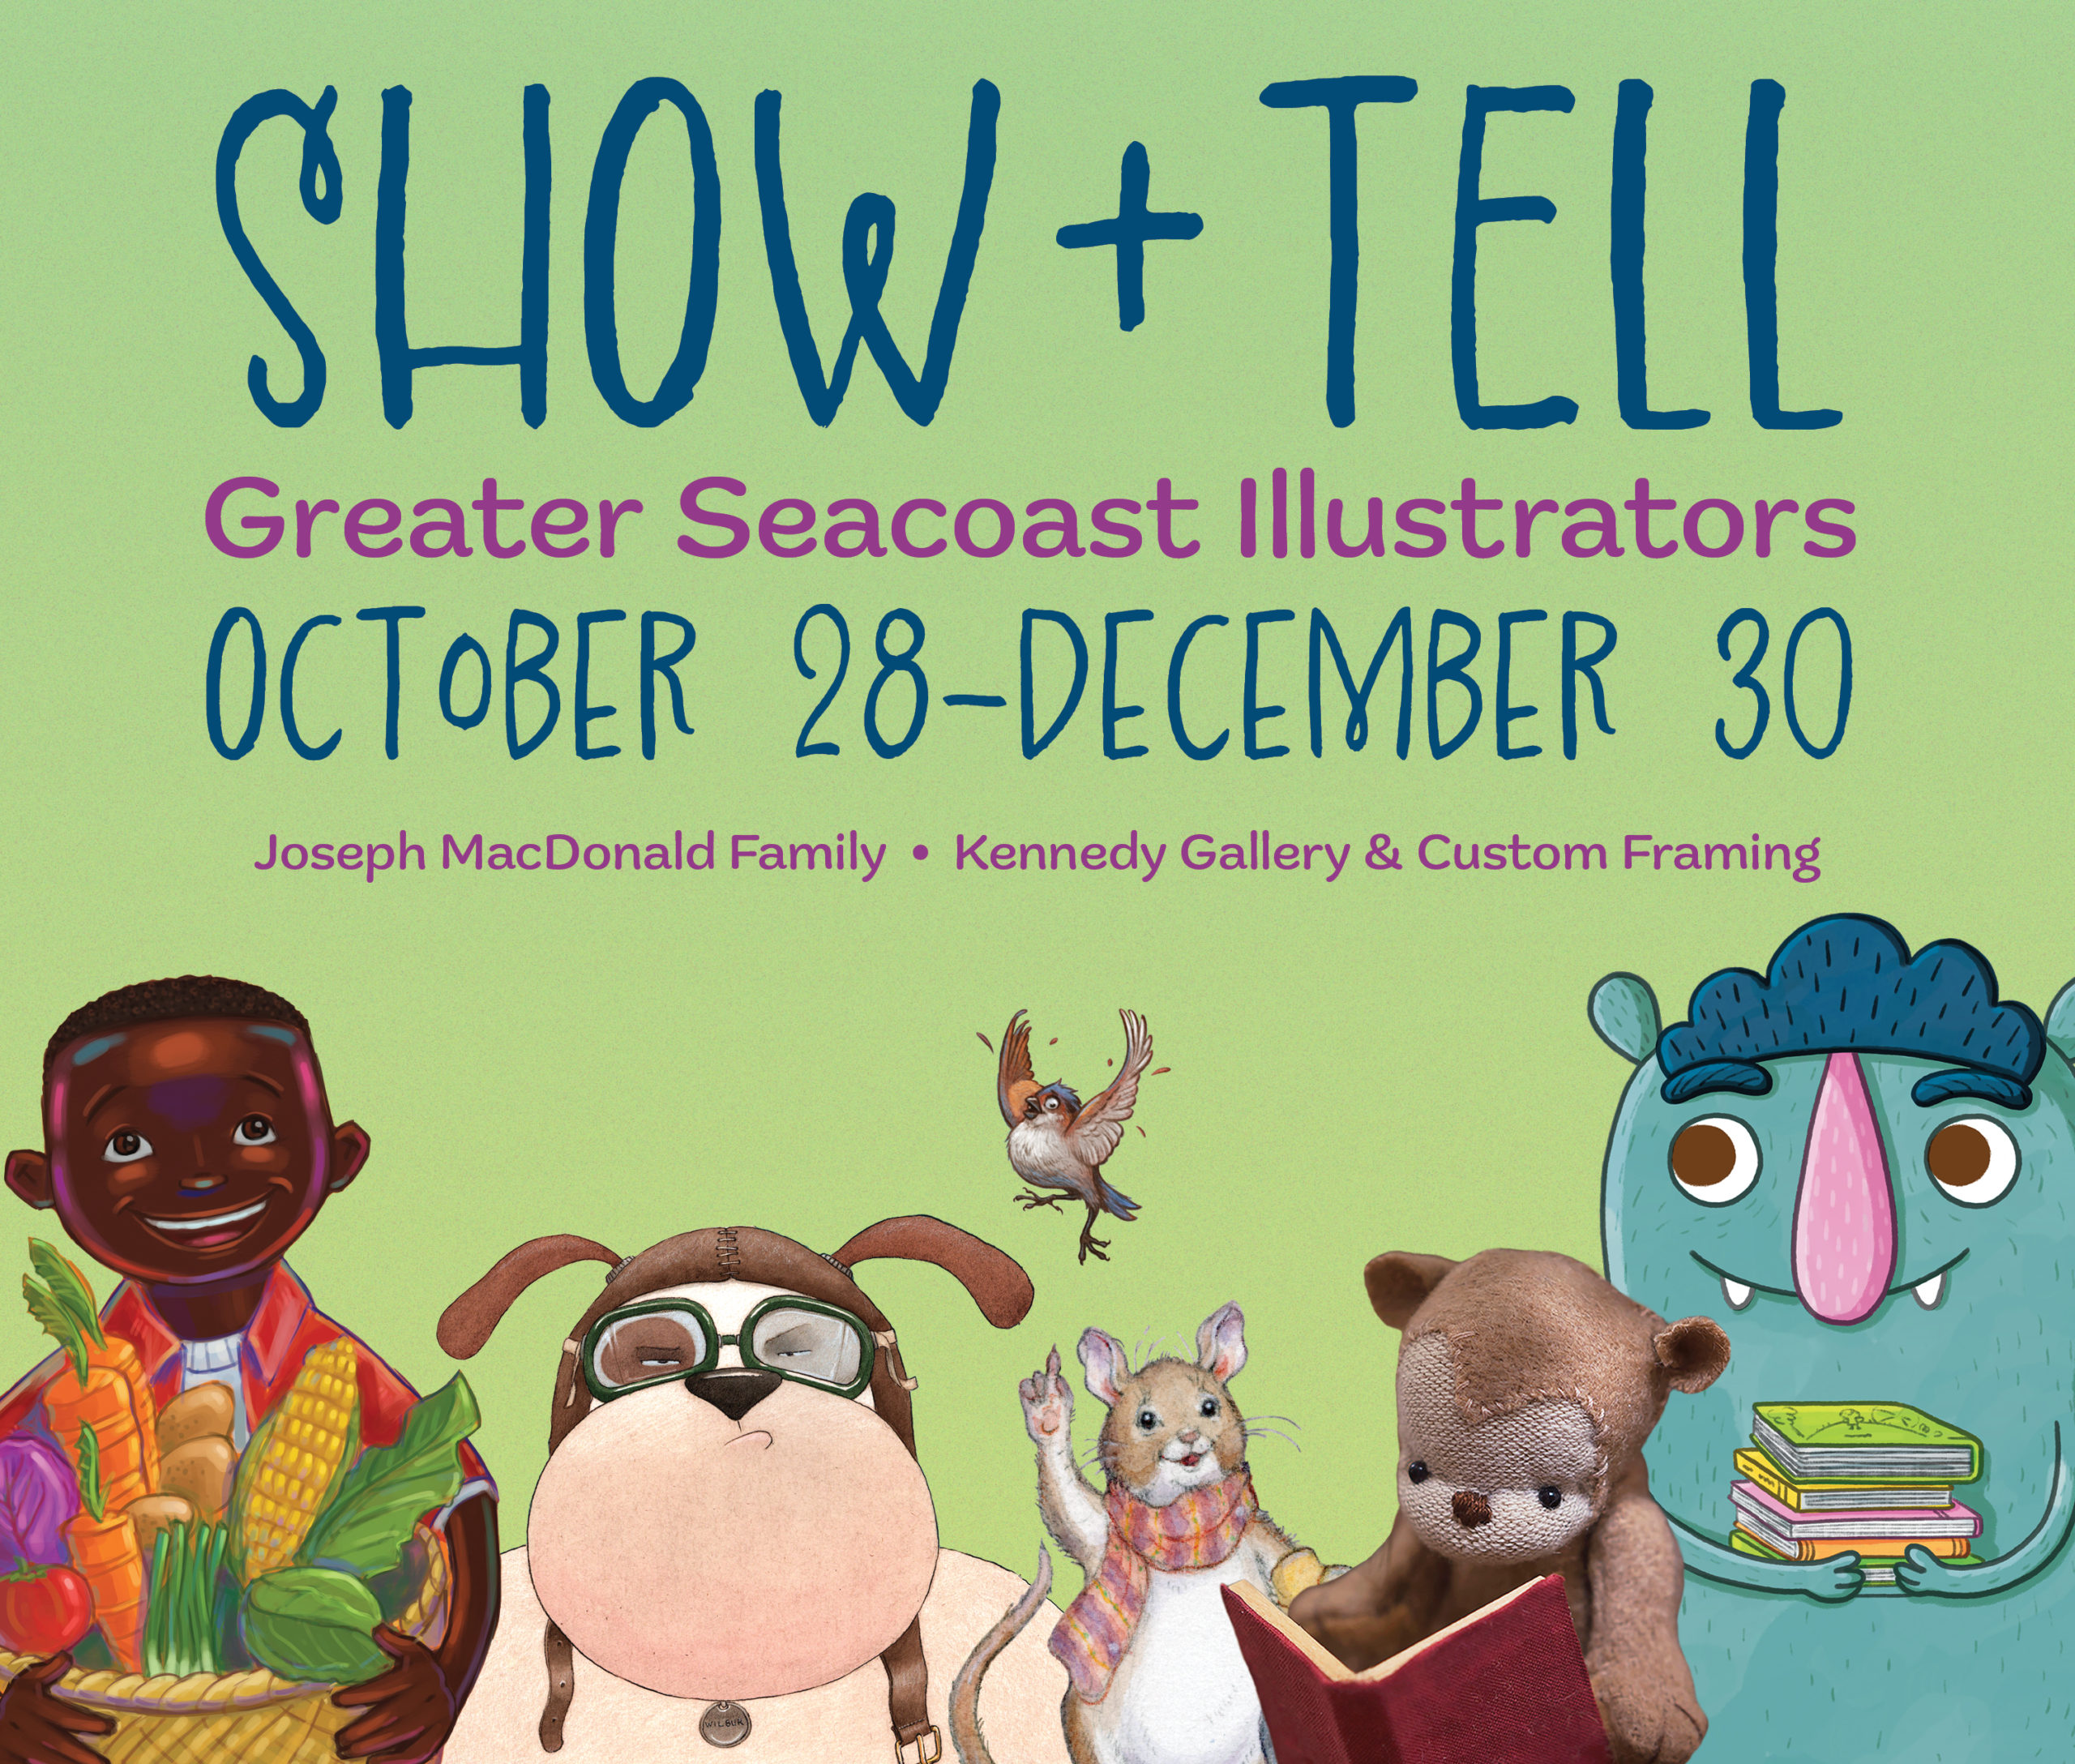 Show+ Tell Exhibition featuring Greater Seacoast Illustrators. Image has a green background and several characters featured in these illustrated books below.